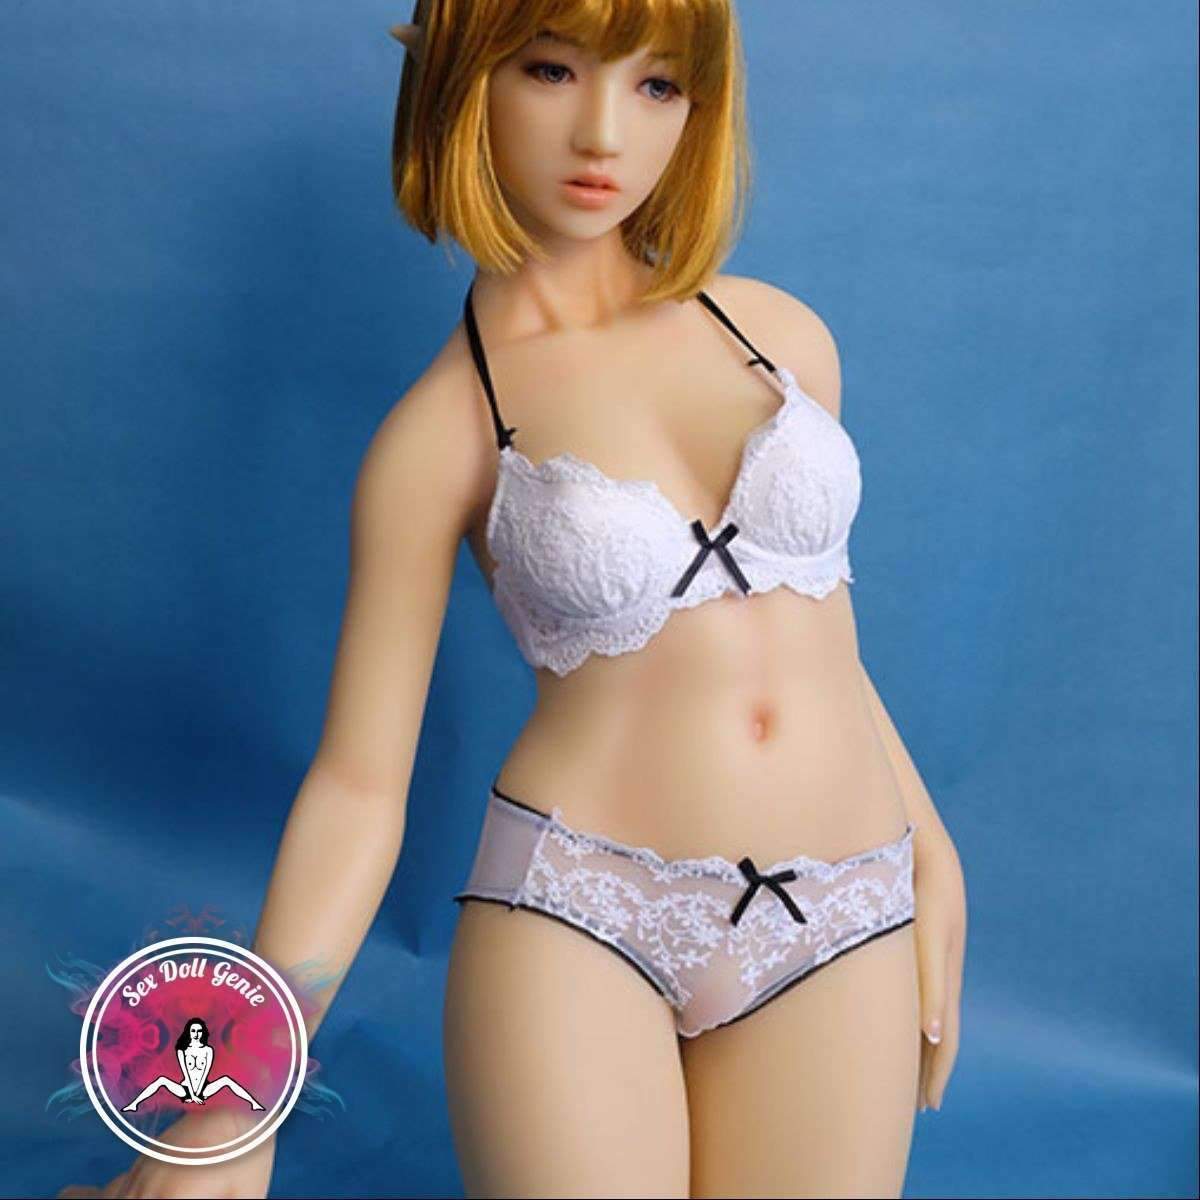 DS Doll - 158cm - Samantha (Elf) Head - Type 2 D Cup Silicone Doll-1